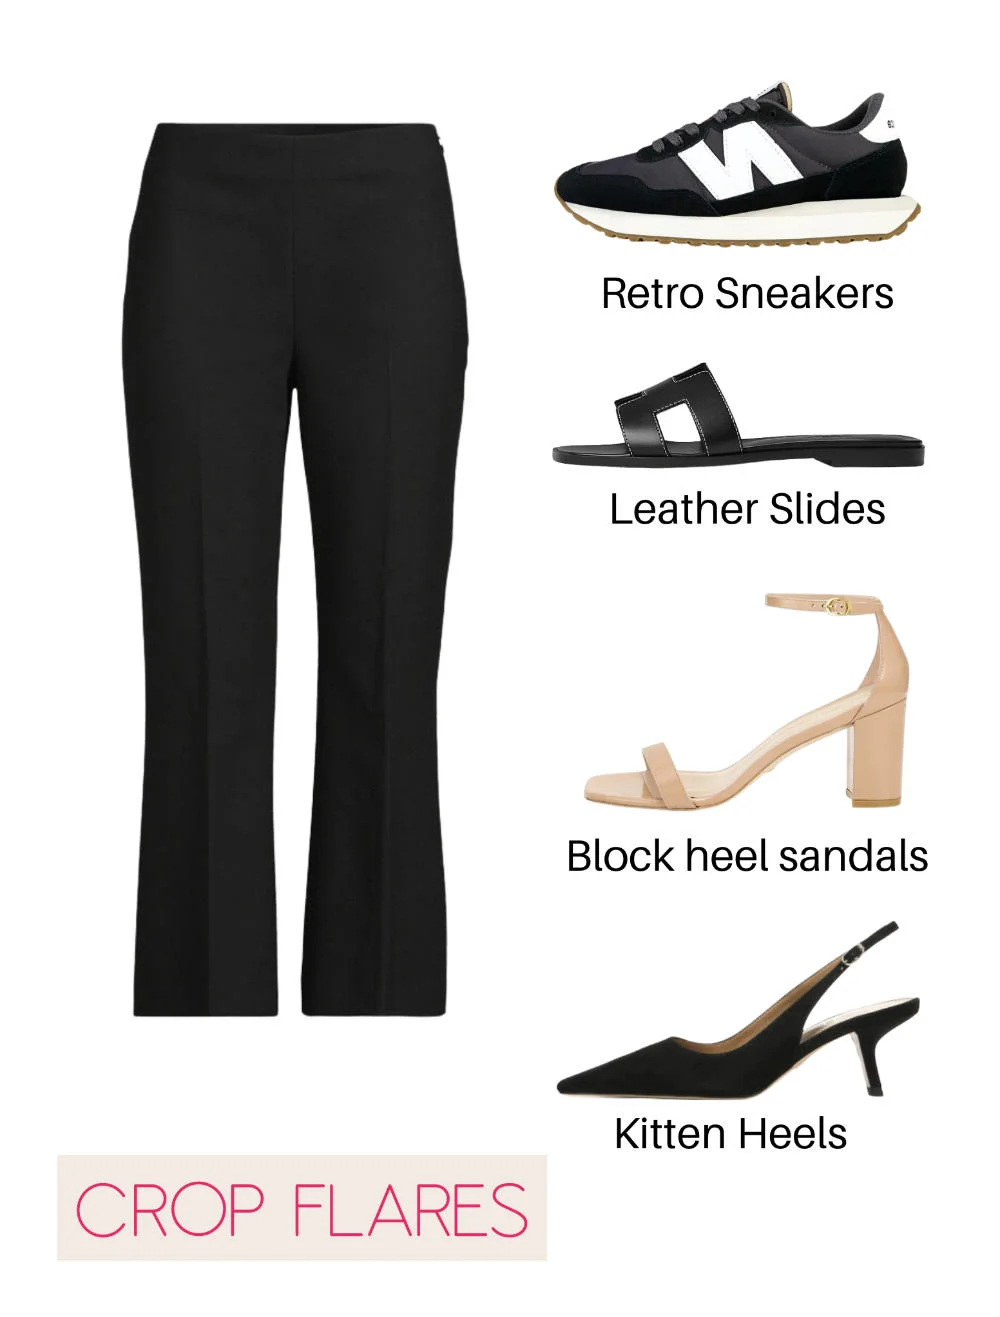 Collage of cropped black flare dress pants with 4 shoes to wear them with.